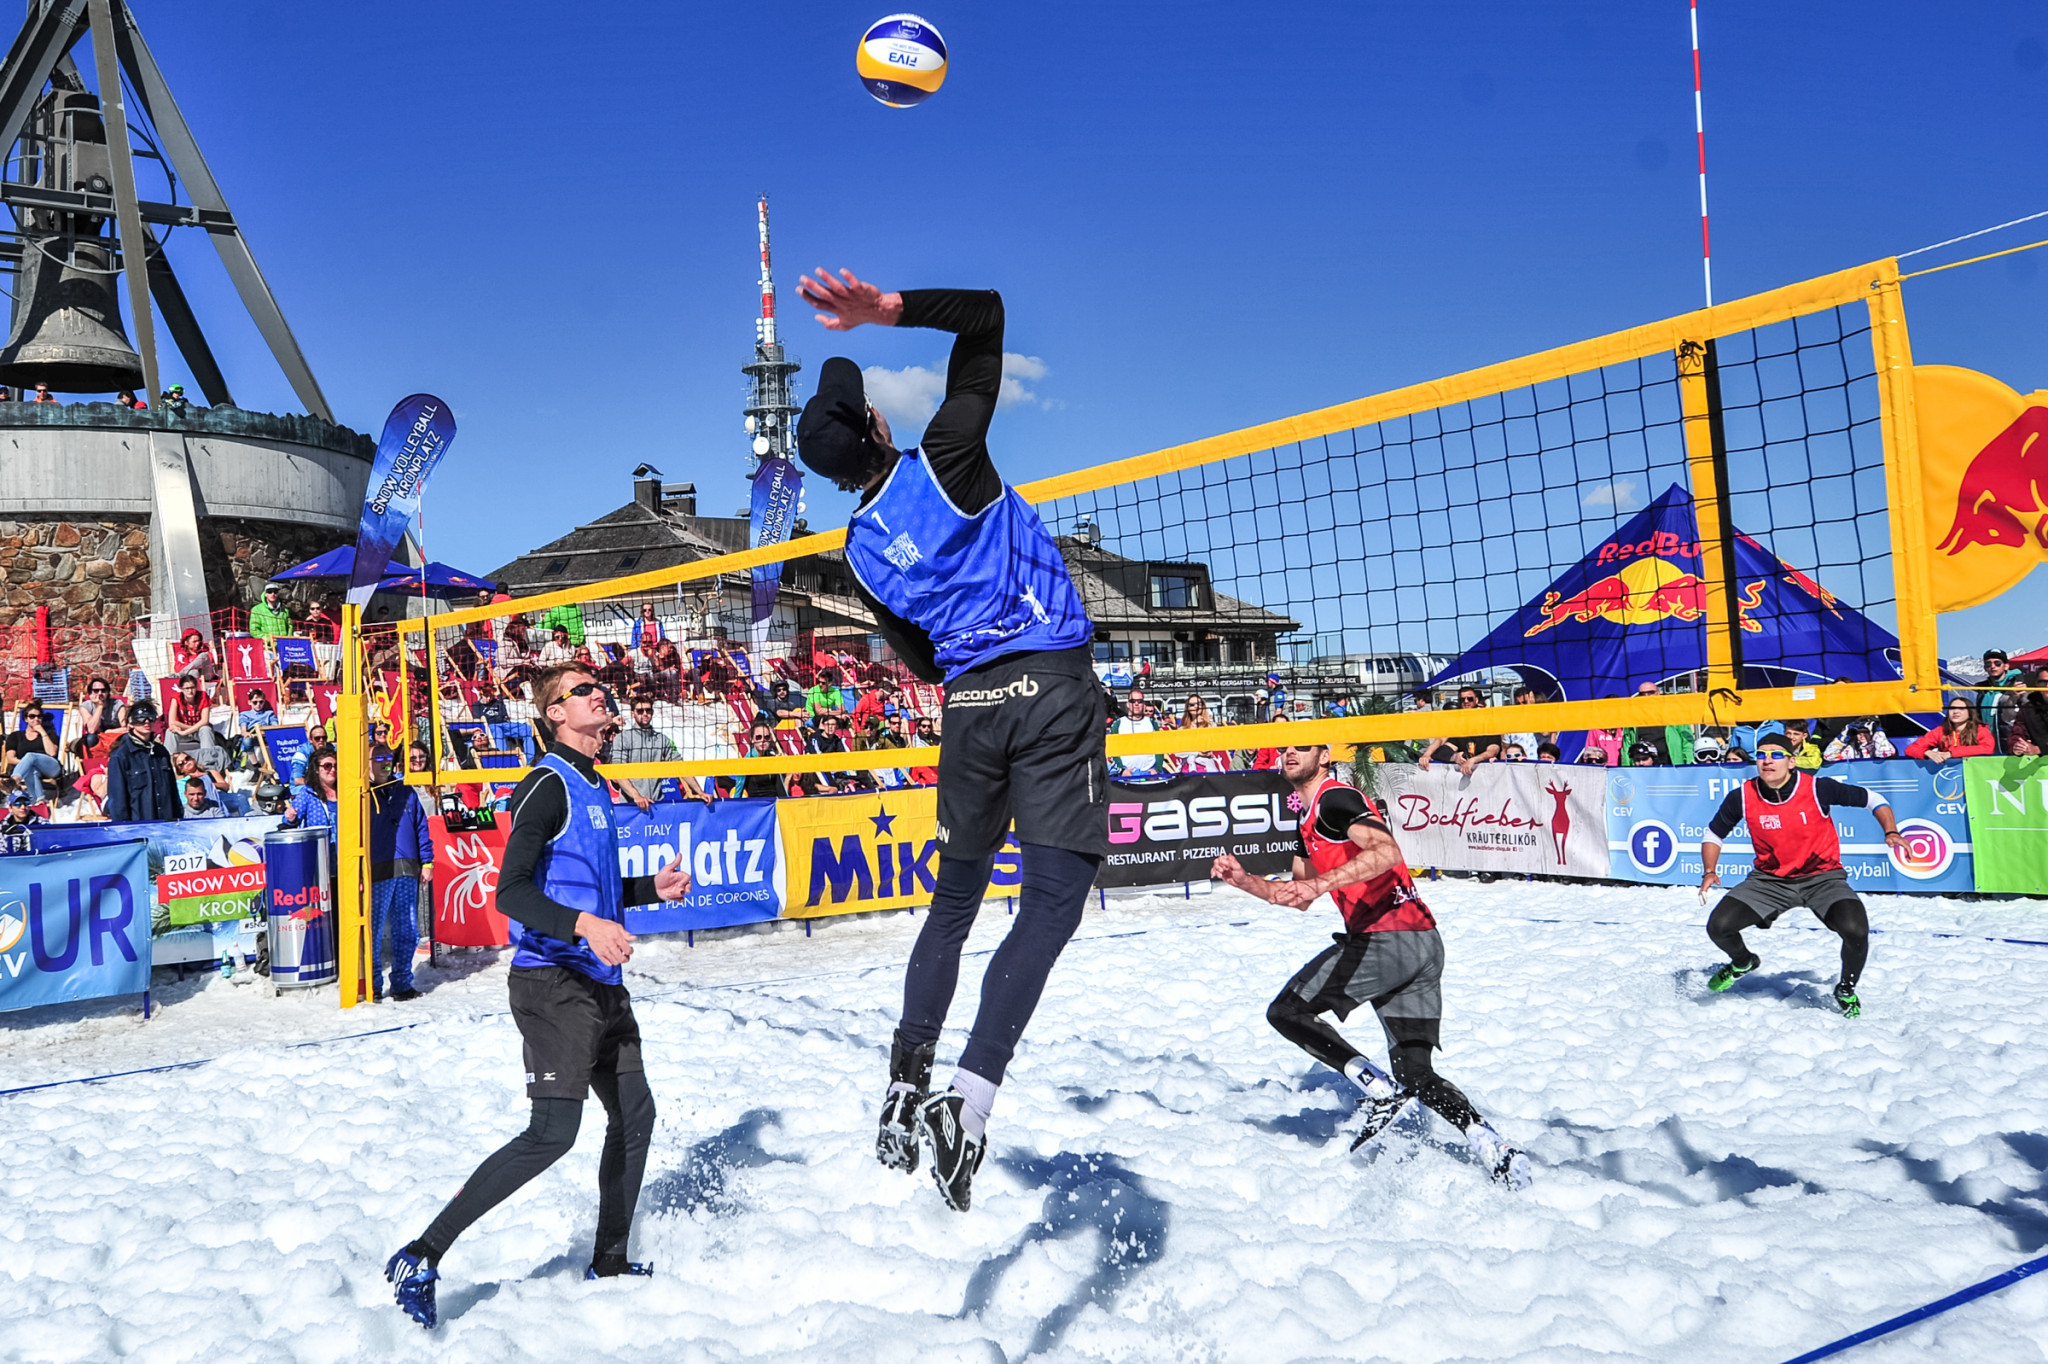 Exclusive: Snow volleyball among sports being considered for Turin 2025